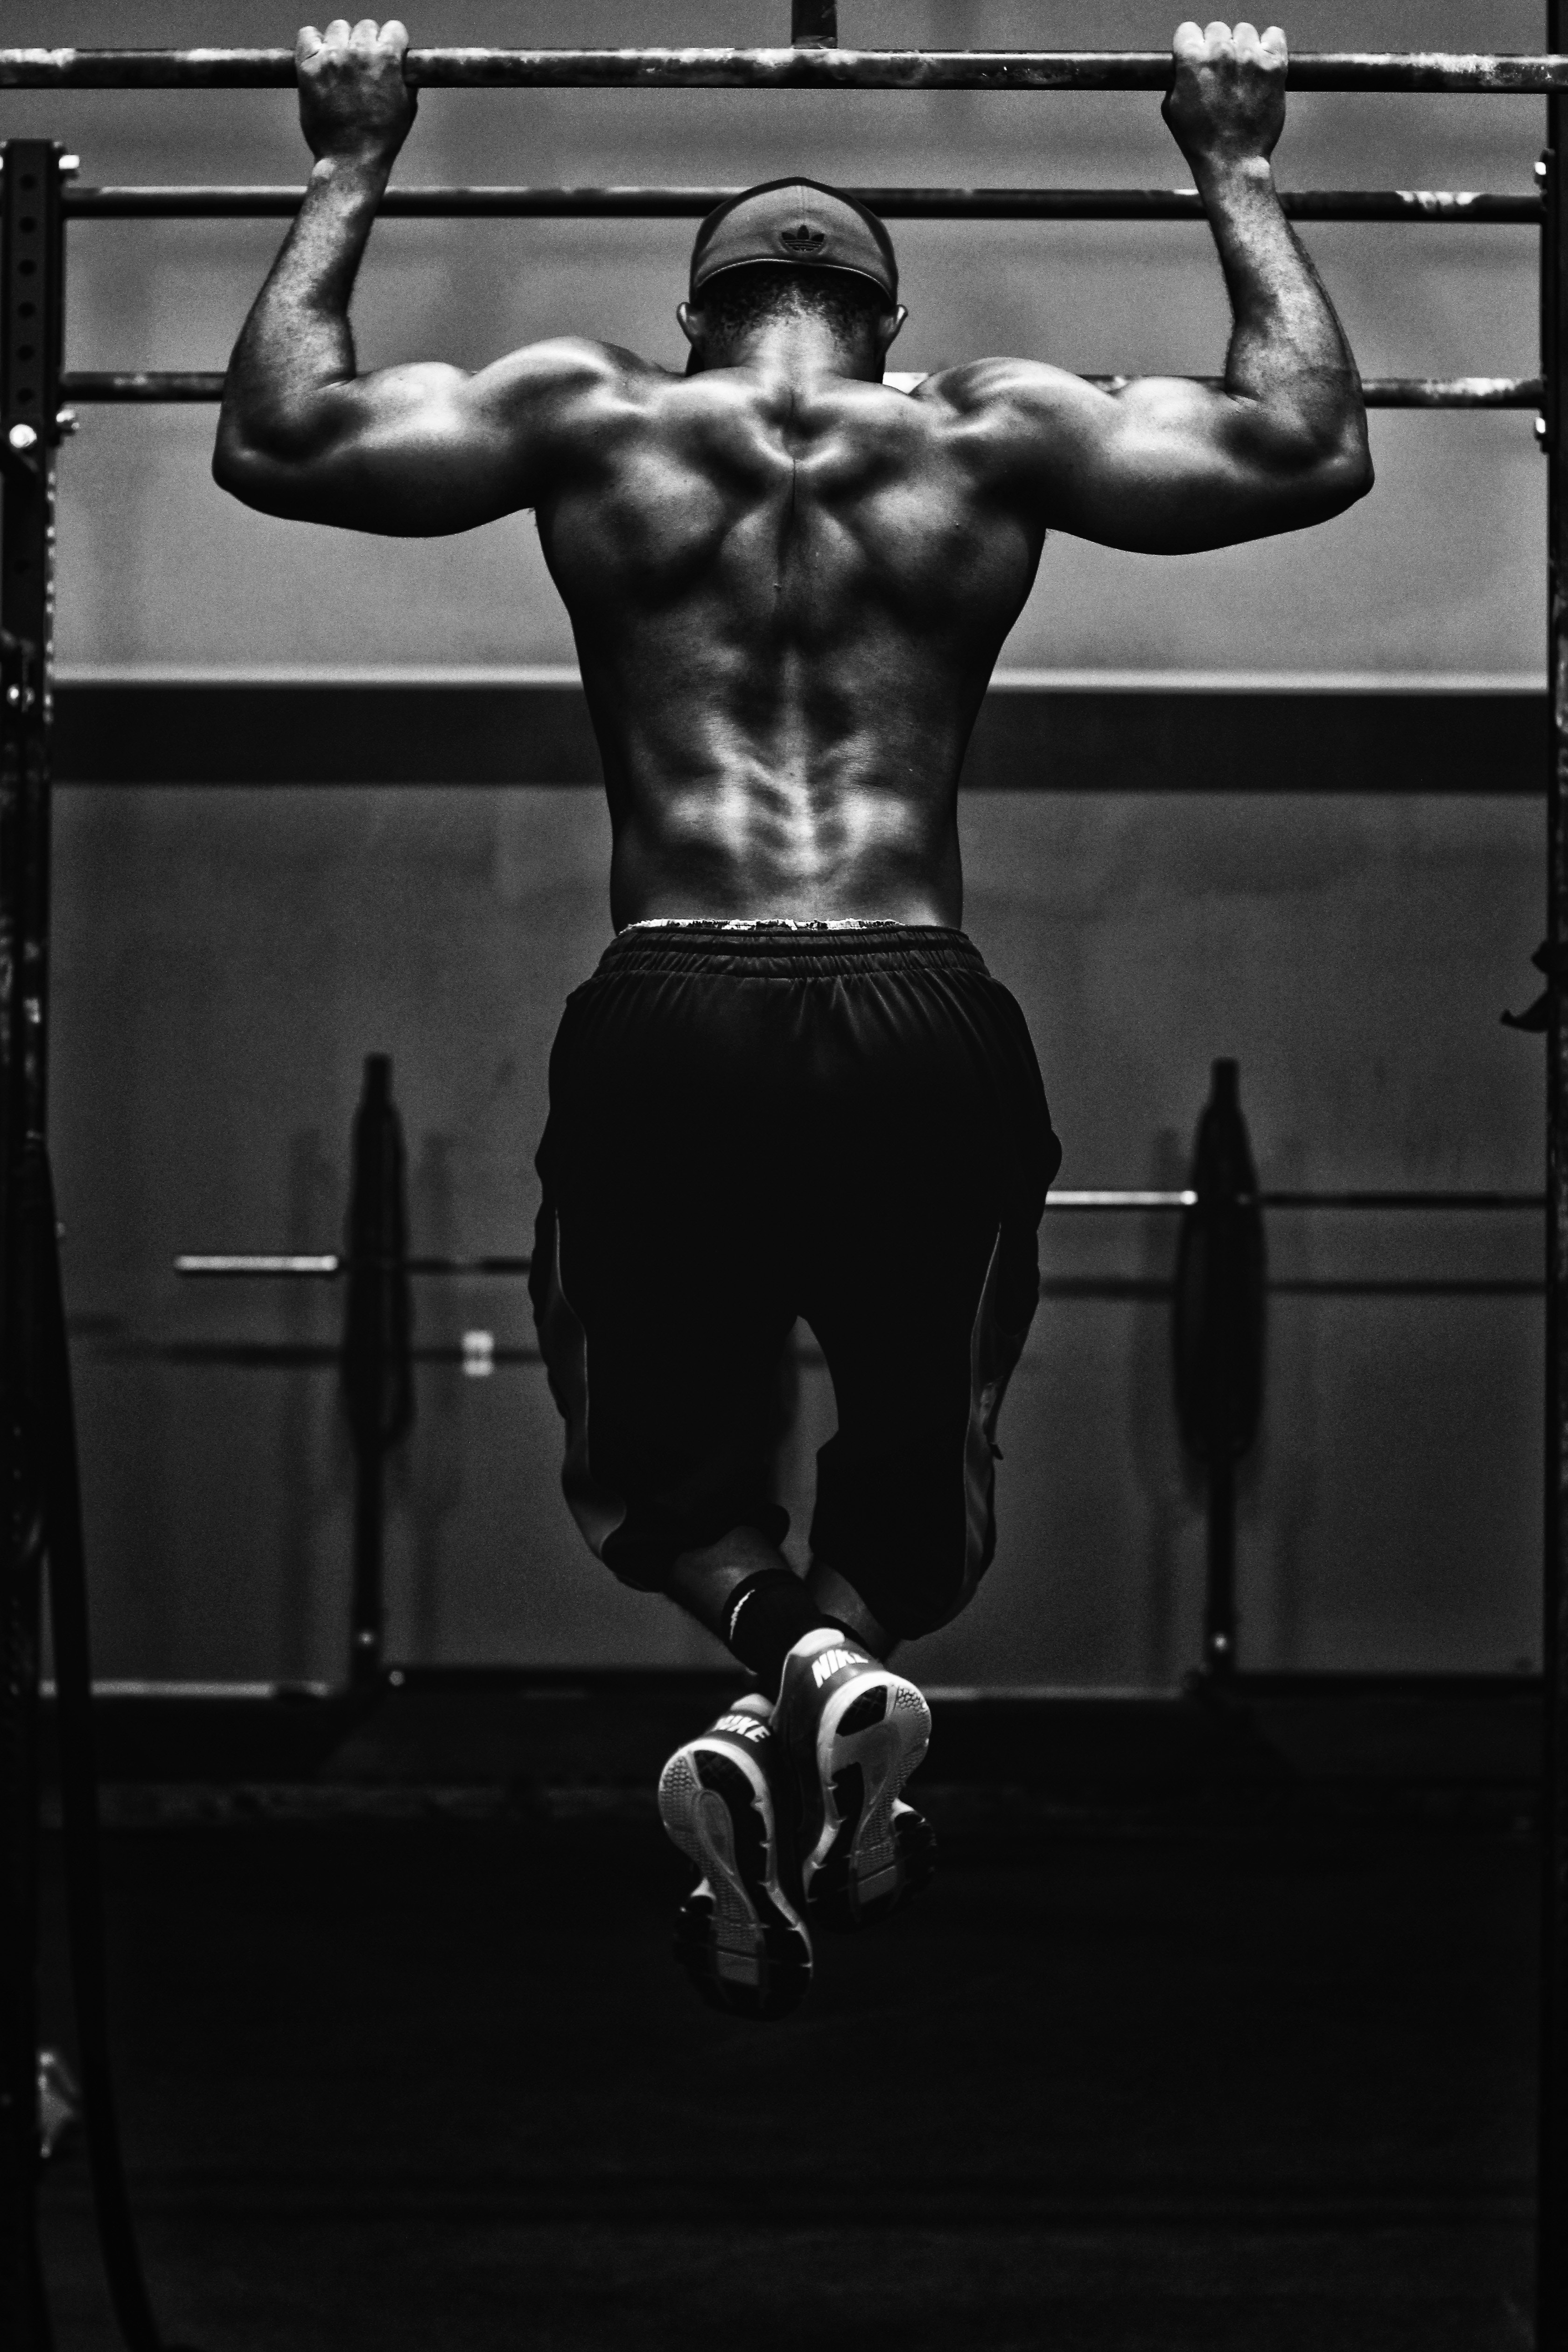 102965 Screensavers and Wallpapers Man for phone. Download sports, bw, chb, man, beam, muscle, athlete, sportsman, brawn, workout, pull-ups, crossbar, horizontal bar pictures for free